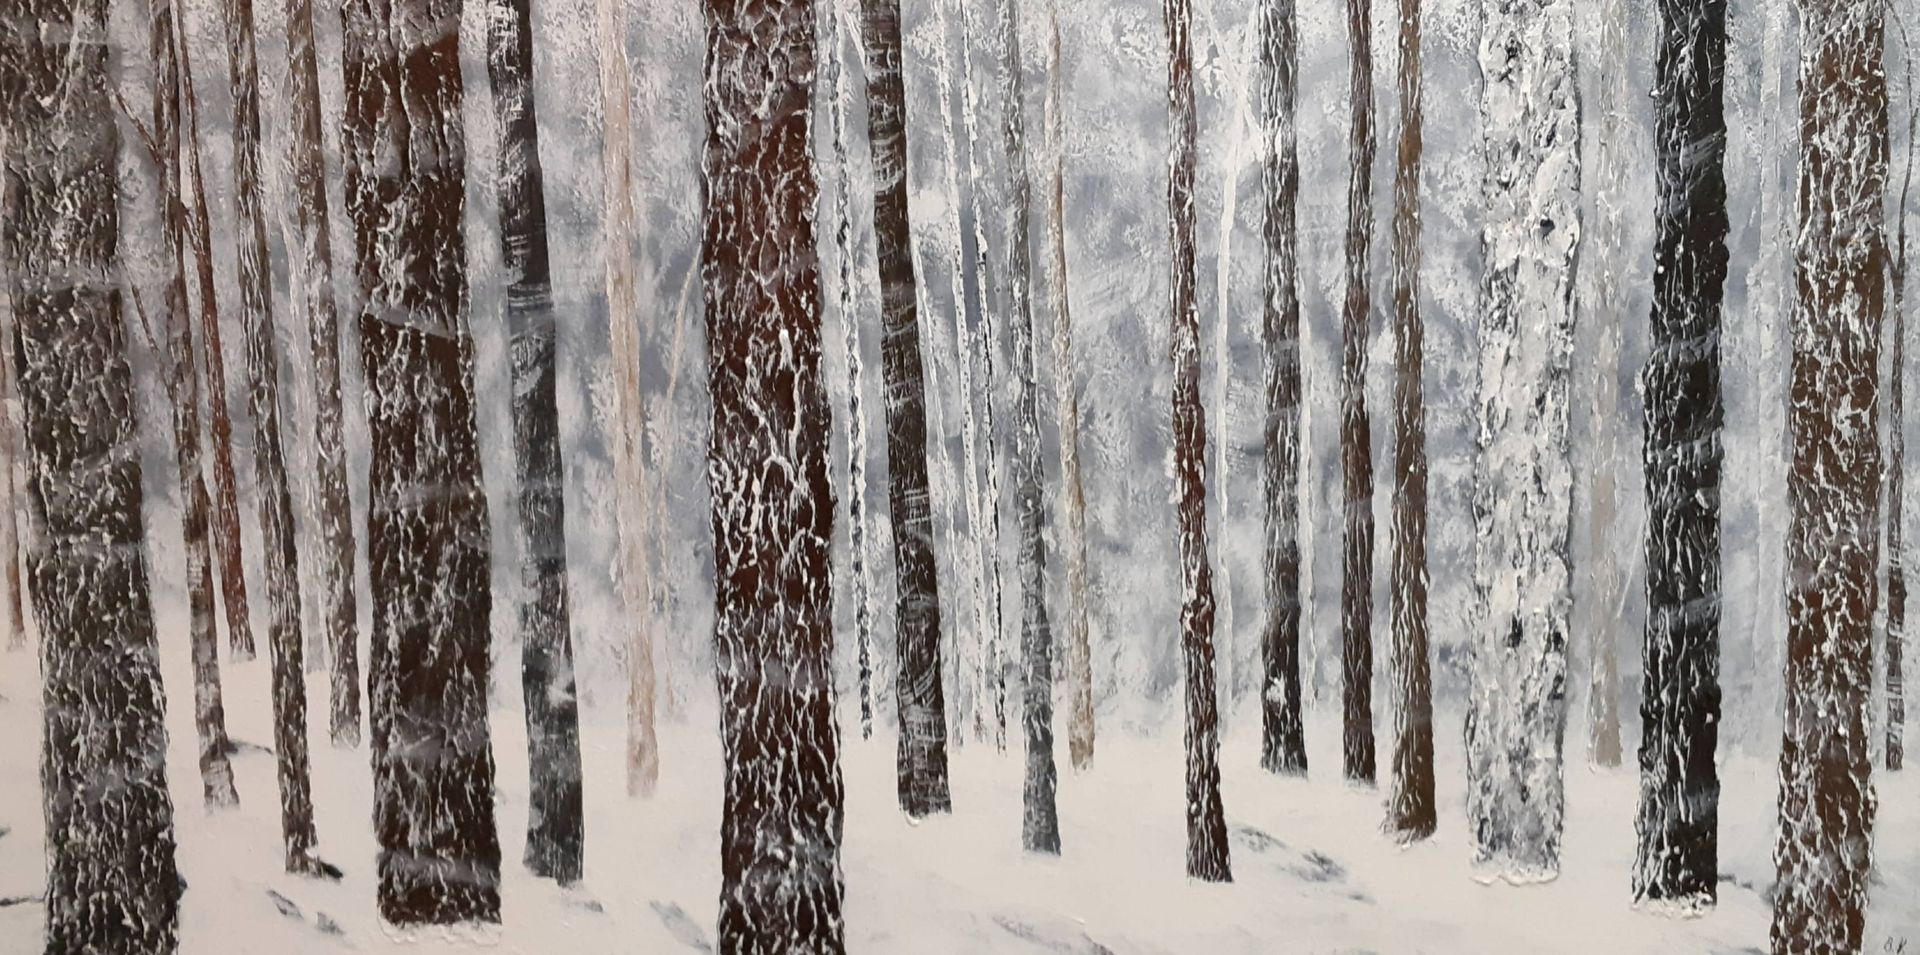 Acrylic Mixed Medium on Canvas 36 in. x 18 in. is a winter forest scene. A walk at this time in the forest will be a walk with whisps of blowing snow. Populated with a large number of tree trunks dappled with snow cover you would be blazing a new trail. There is a hint of uneven terrain.